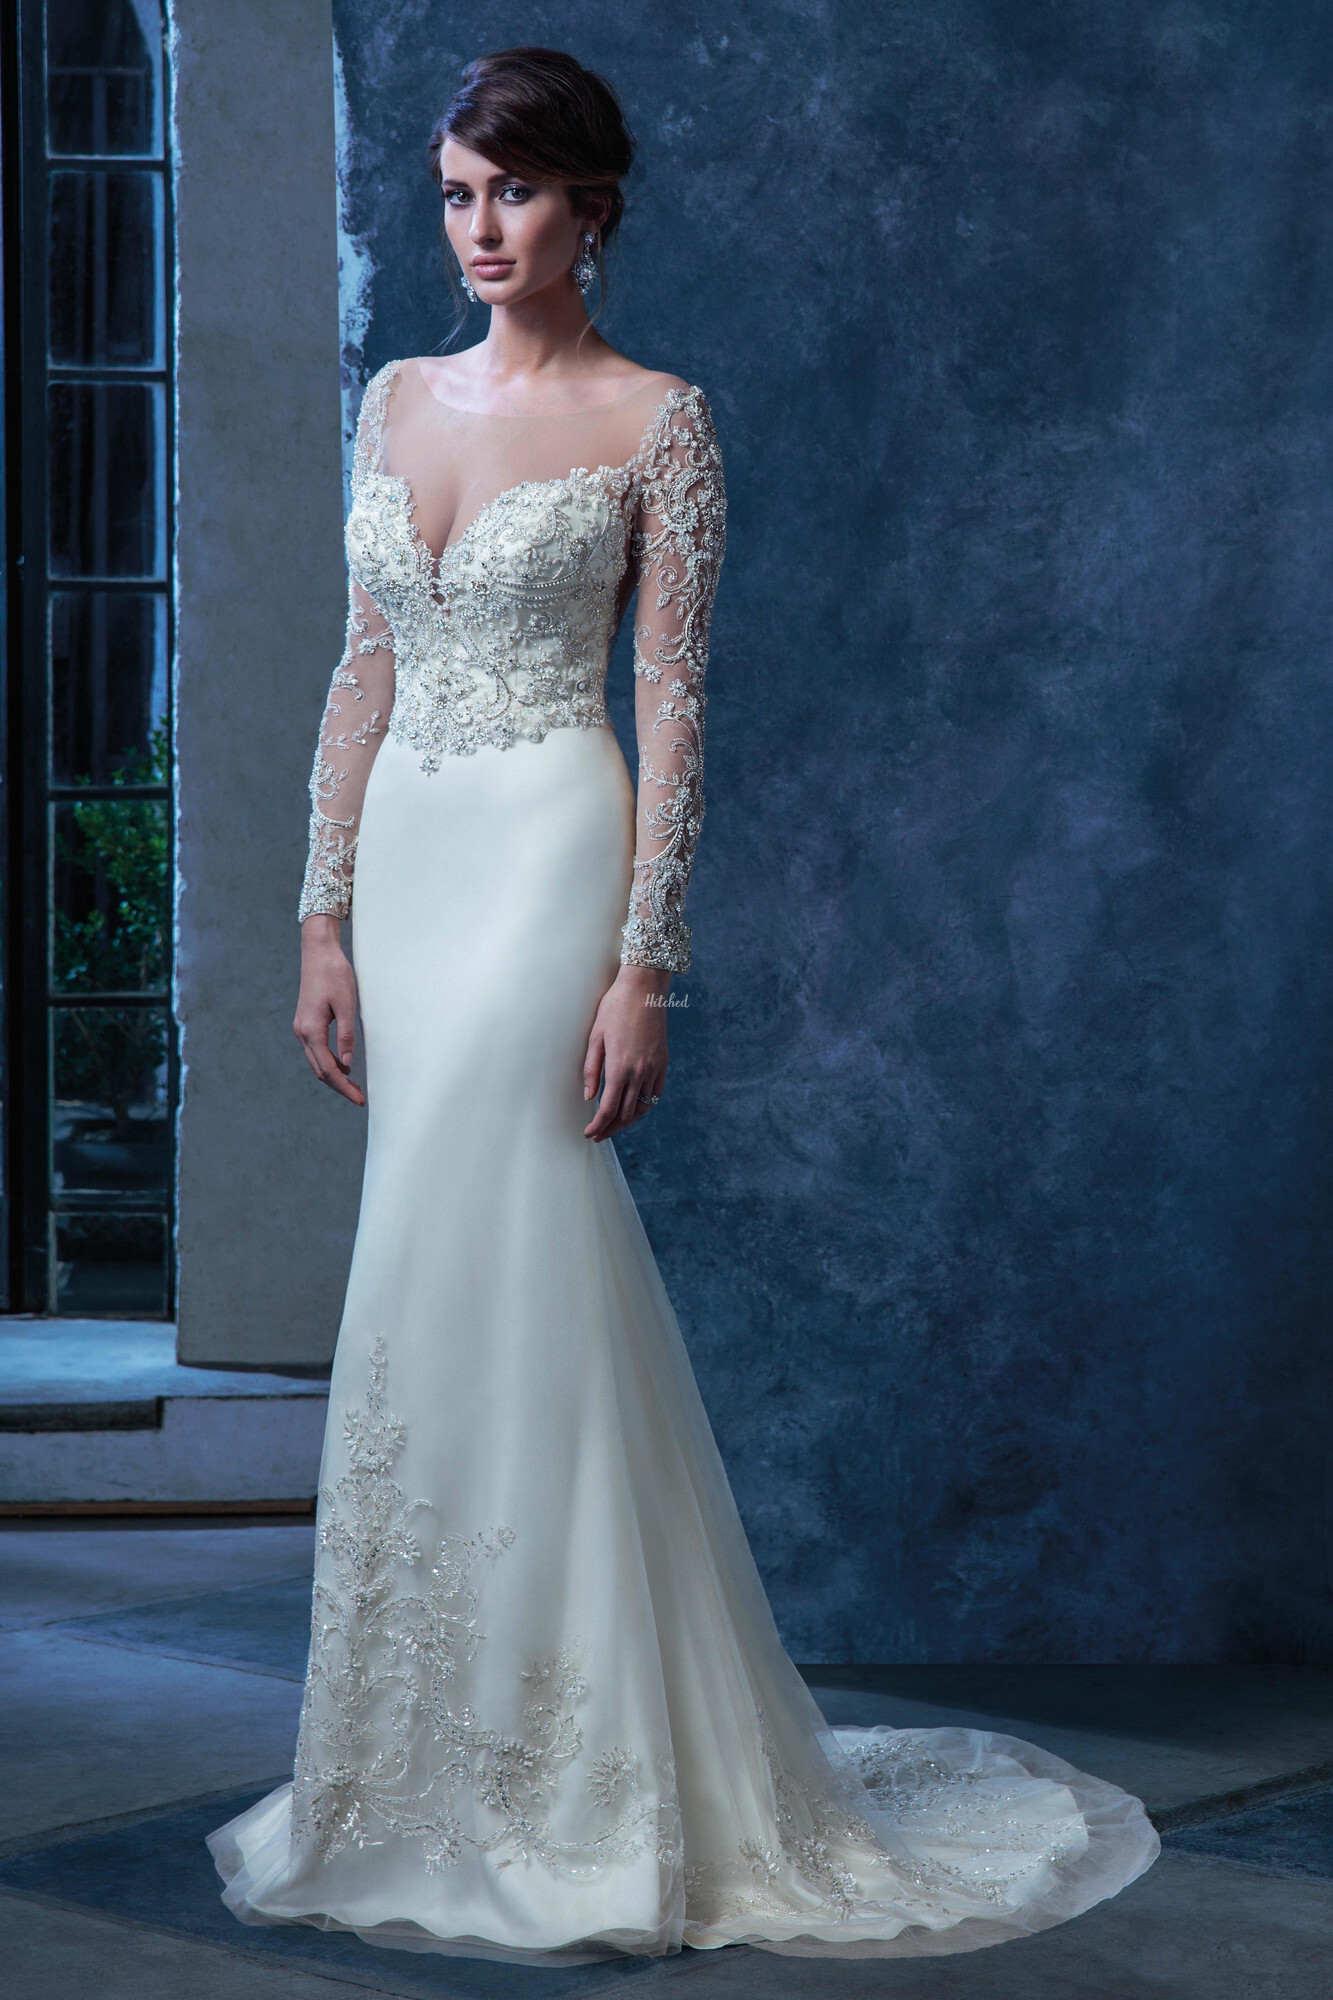 Penelope Wedding Dress from Amare Couture - hitched.co.uk